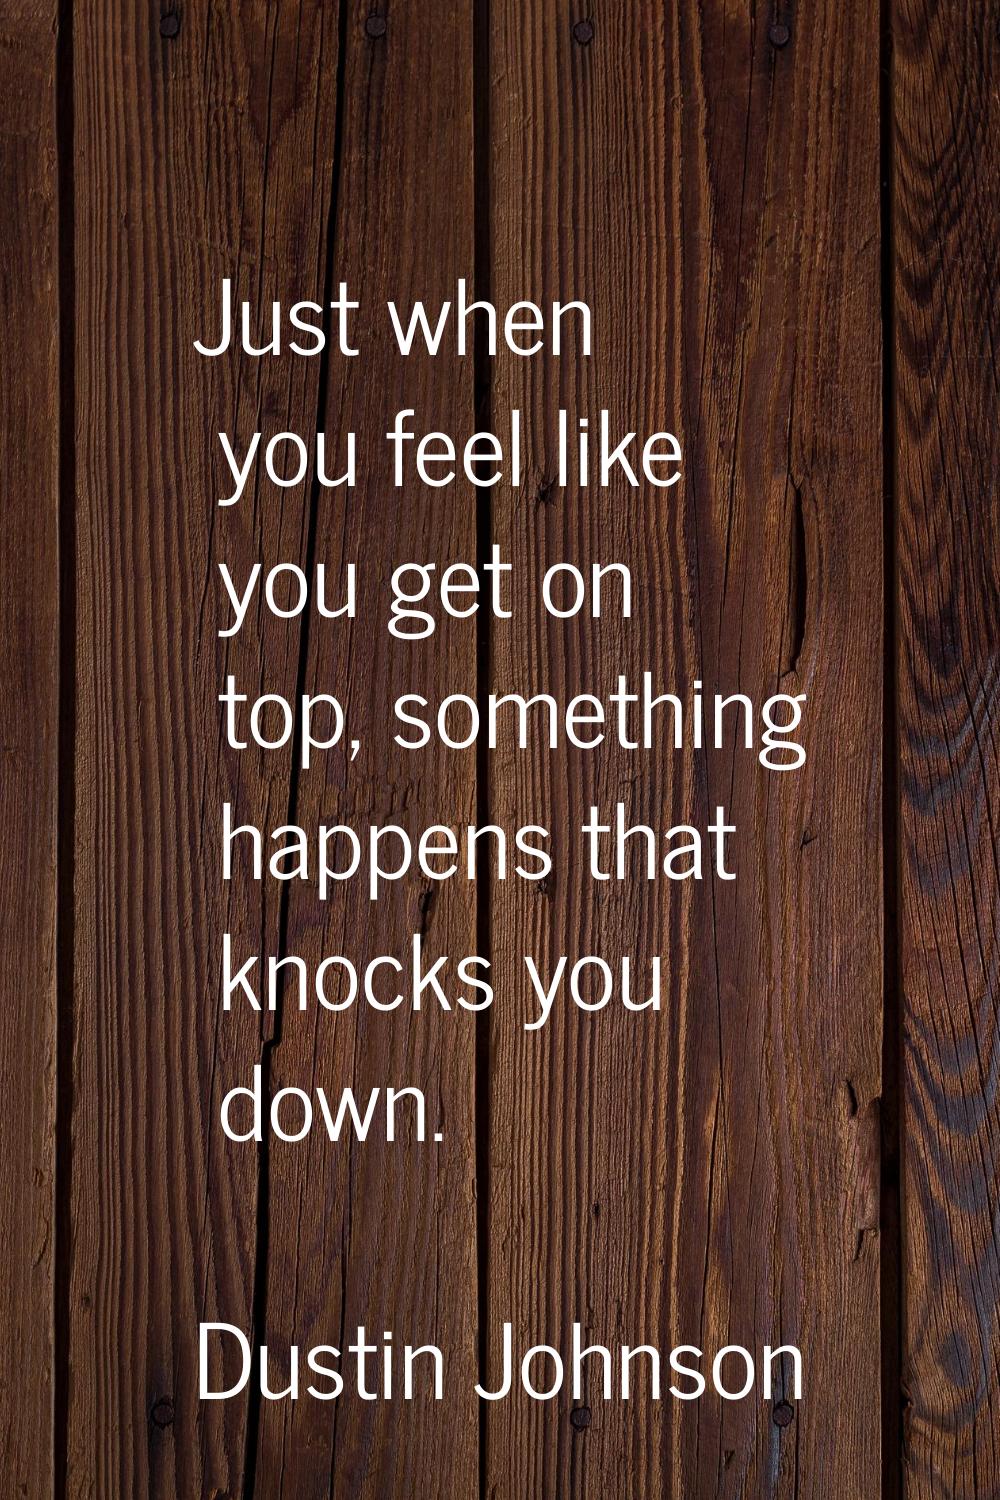 Just when you feel like you get on top, something happens that knocks you down.